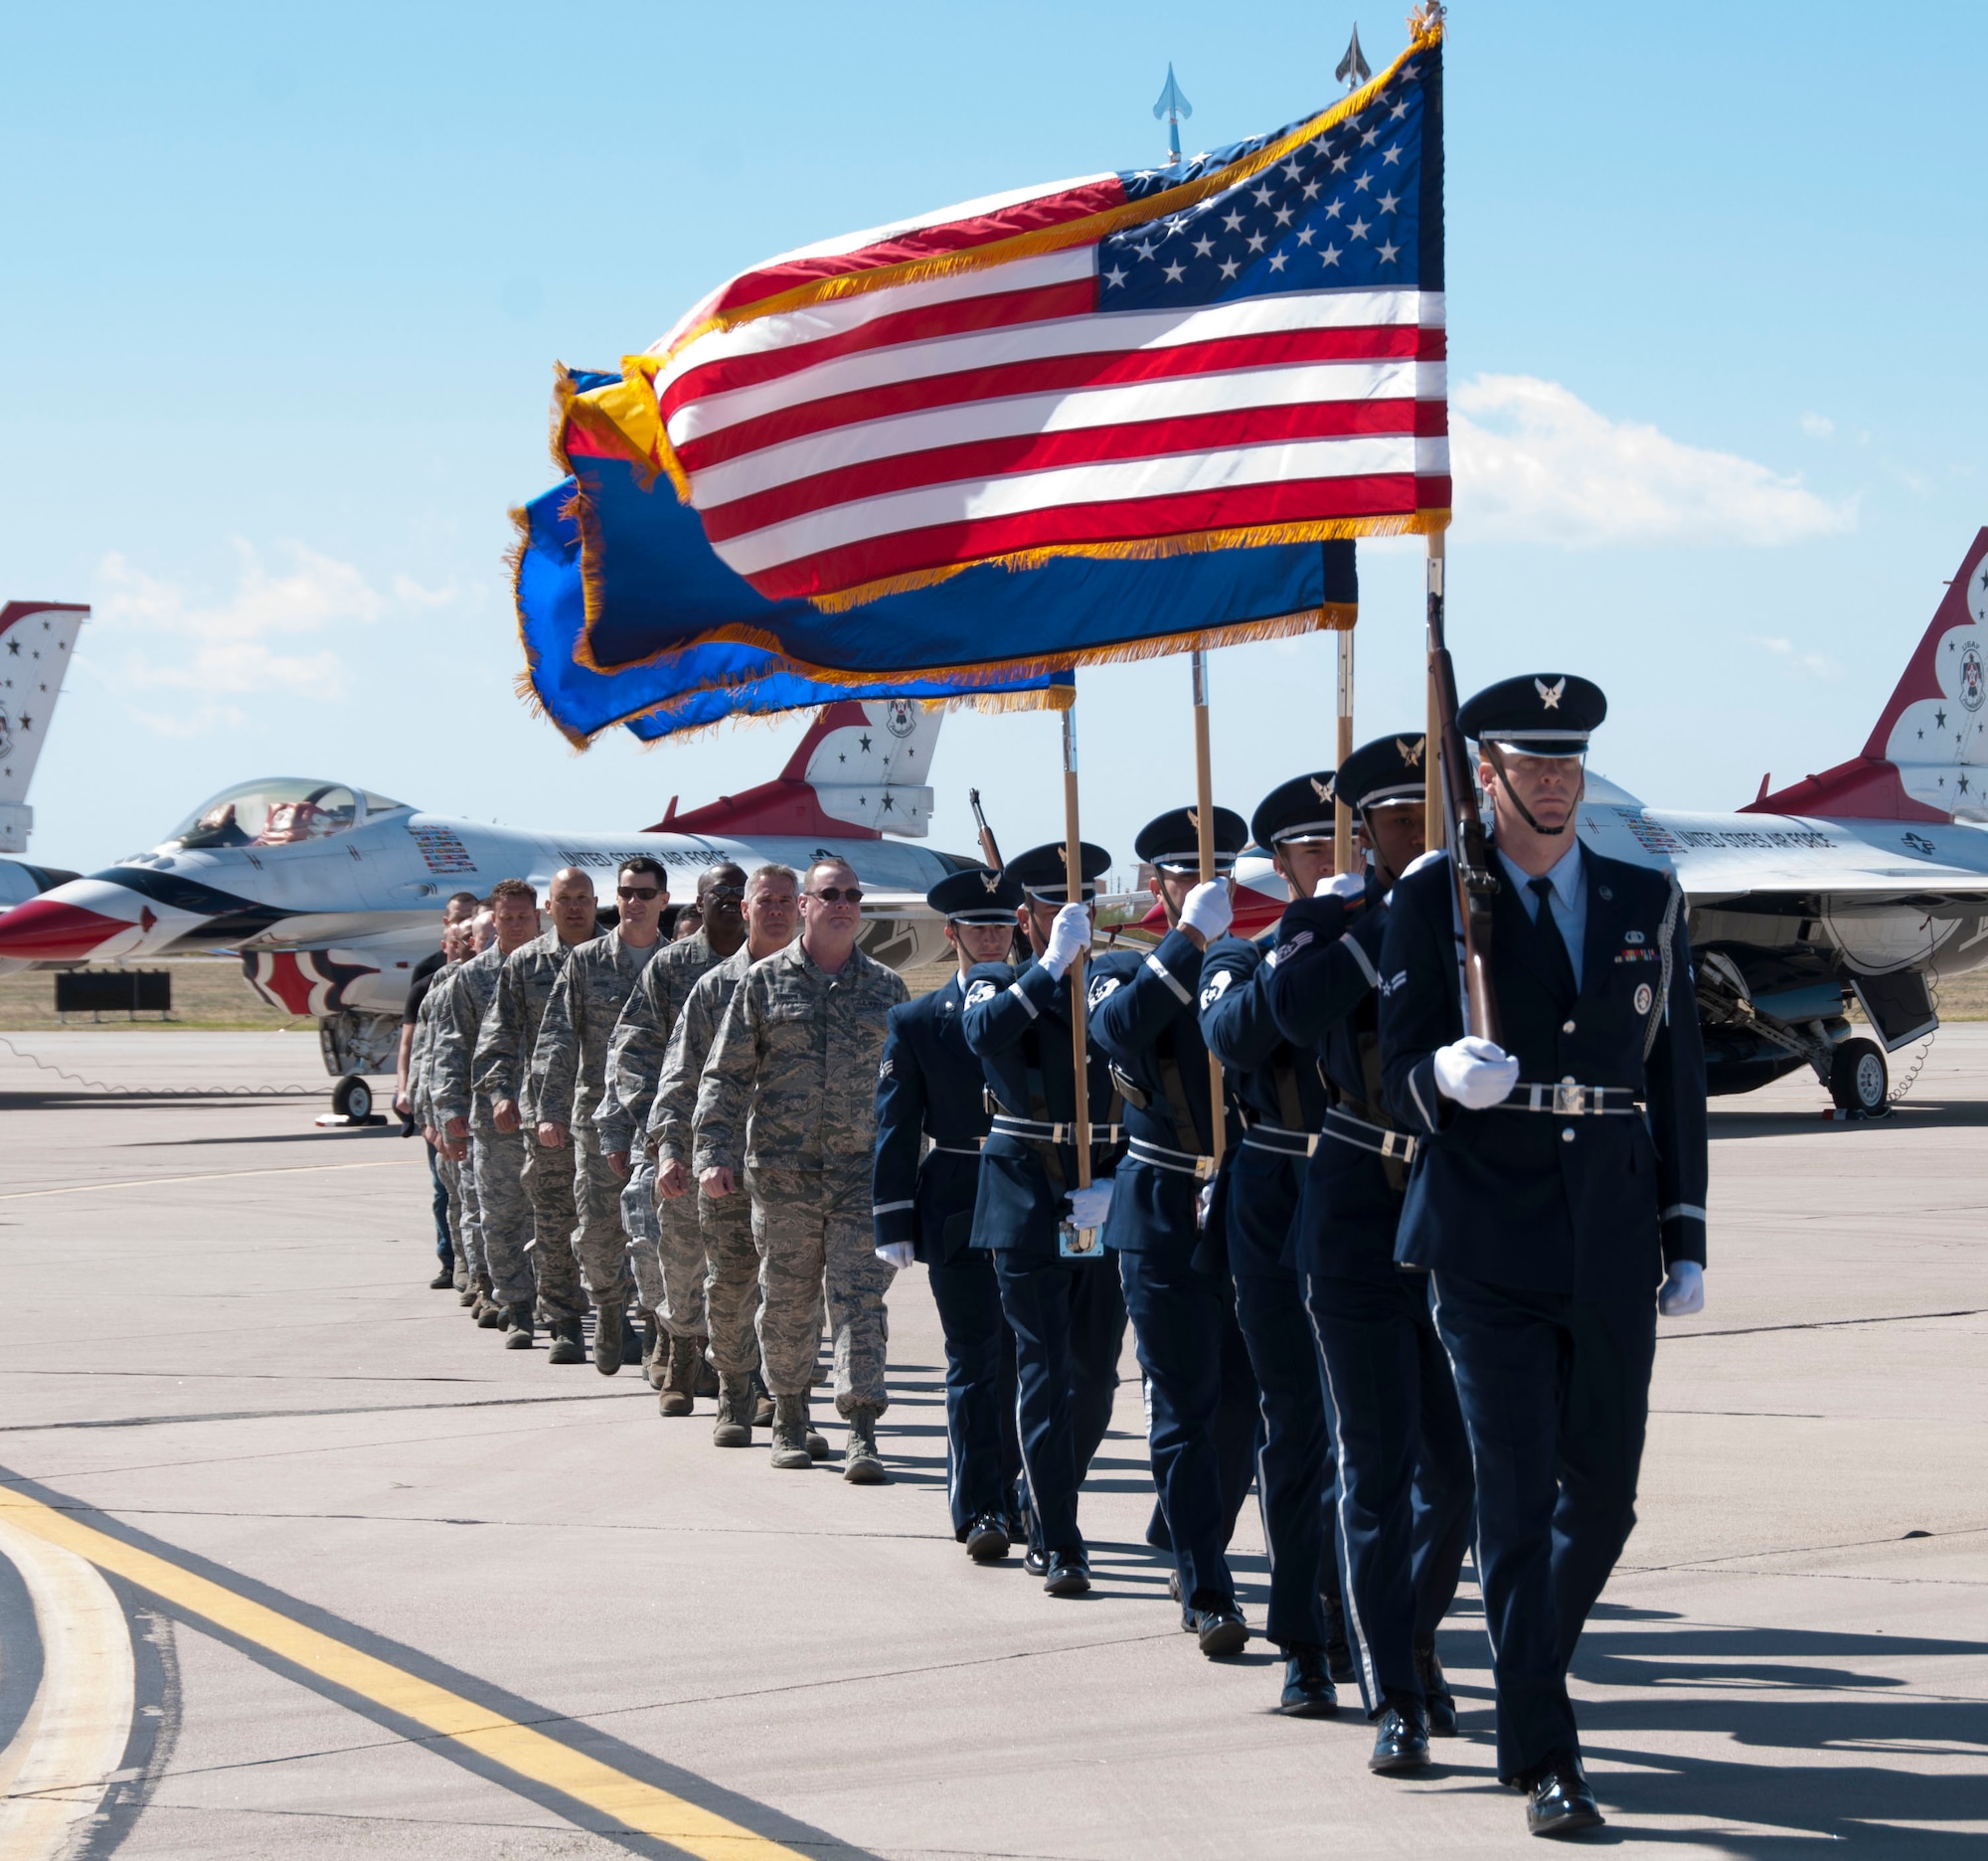 Honor Guard members from the Arizona Air National Guard’s 162nd Wing and Davis-Monthan Air Force Base stood proudly displaying the colors of our great nation and the state of Arizona during an enlistment ceremony at D-M’s “Thunder and Lightning over Arizona” March 12.  Guard members are proud to highlight the outstanding relationship between D-M, the United States Air Force and the Tucson community at this year’s event. (U.S. Air National Guard photo by Staff Sgt. Gregory Ferreira/Released)

